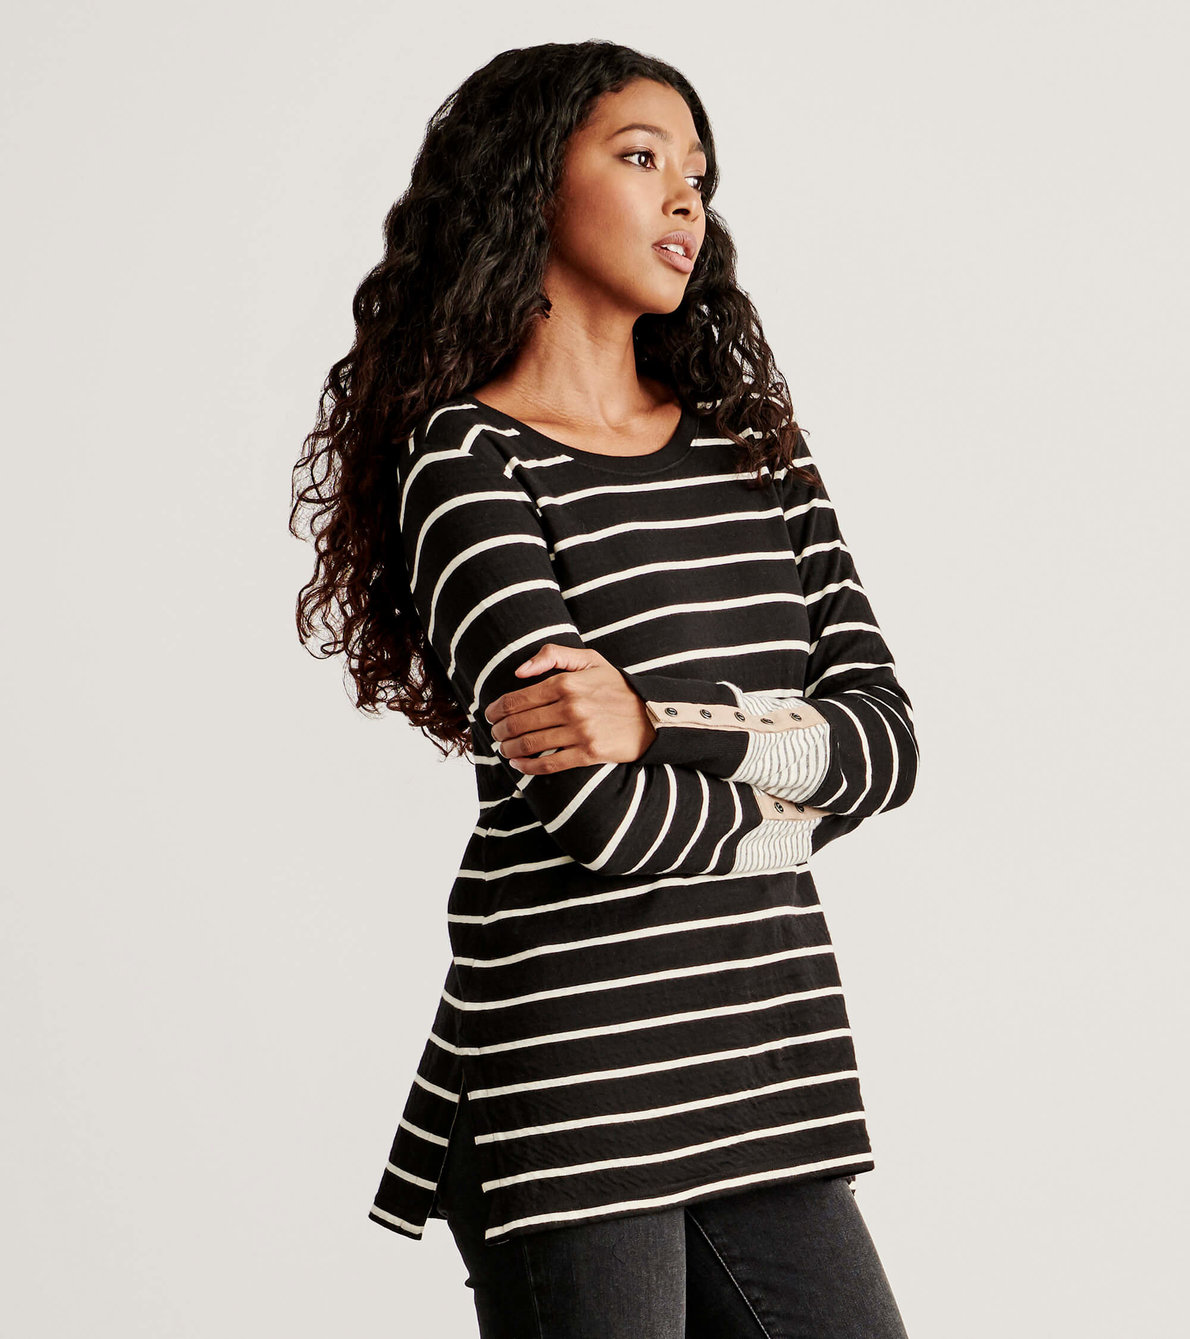 View larger image of Noelle Tunic - Black and Cream Stripes